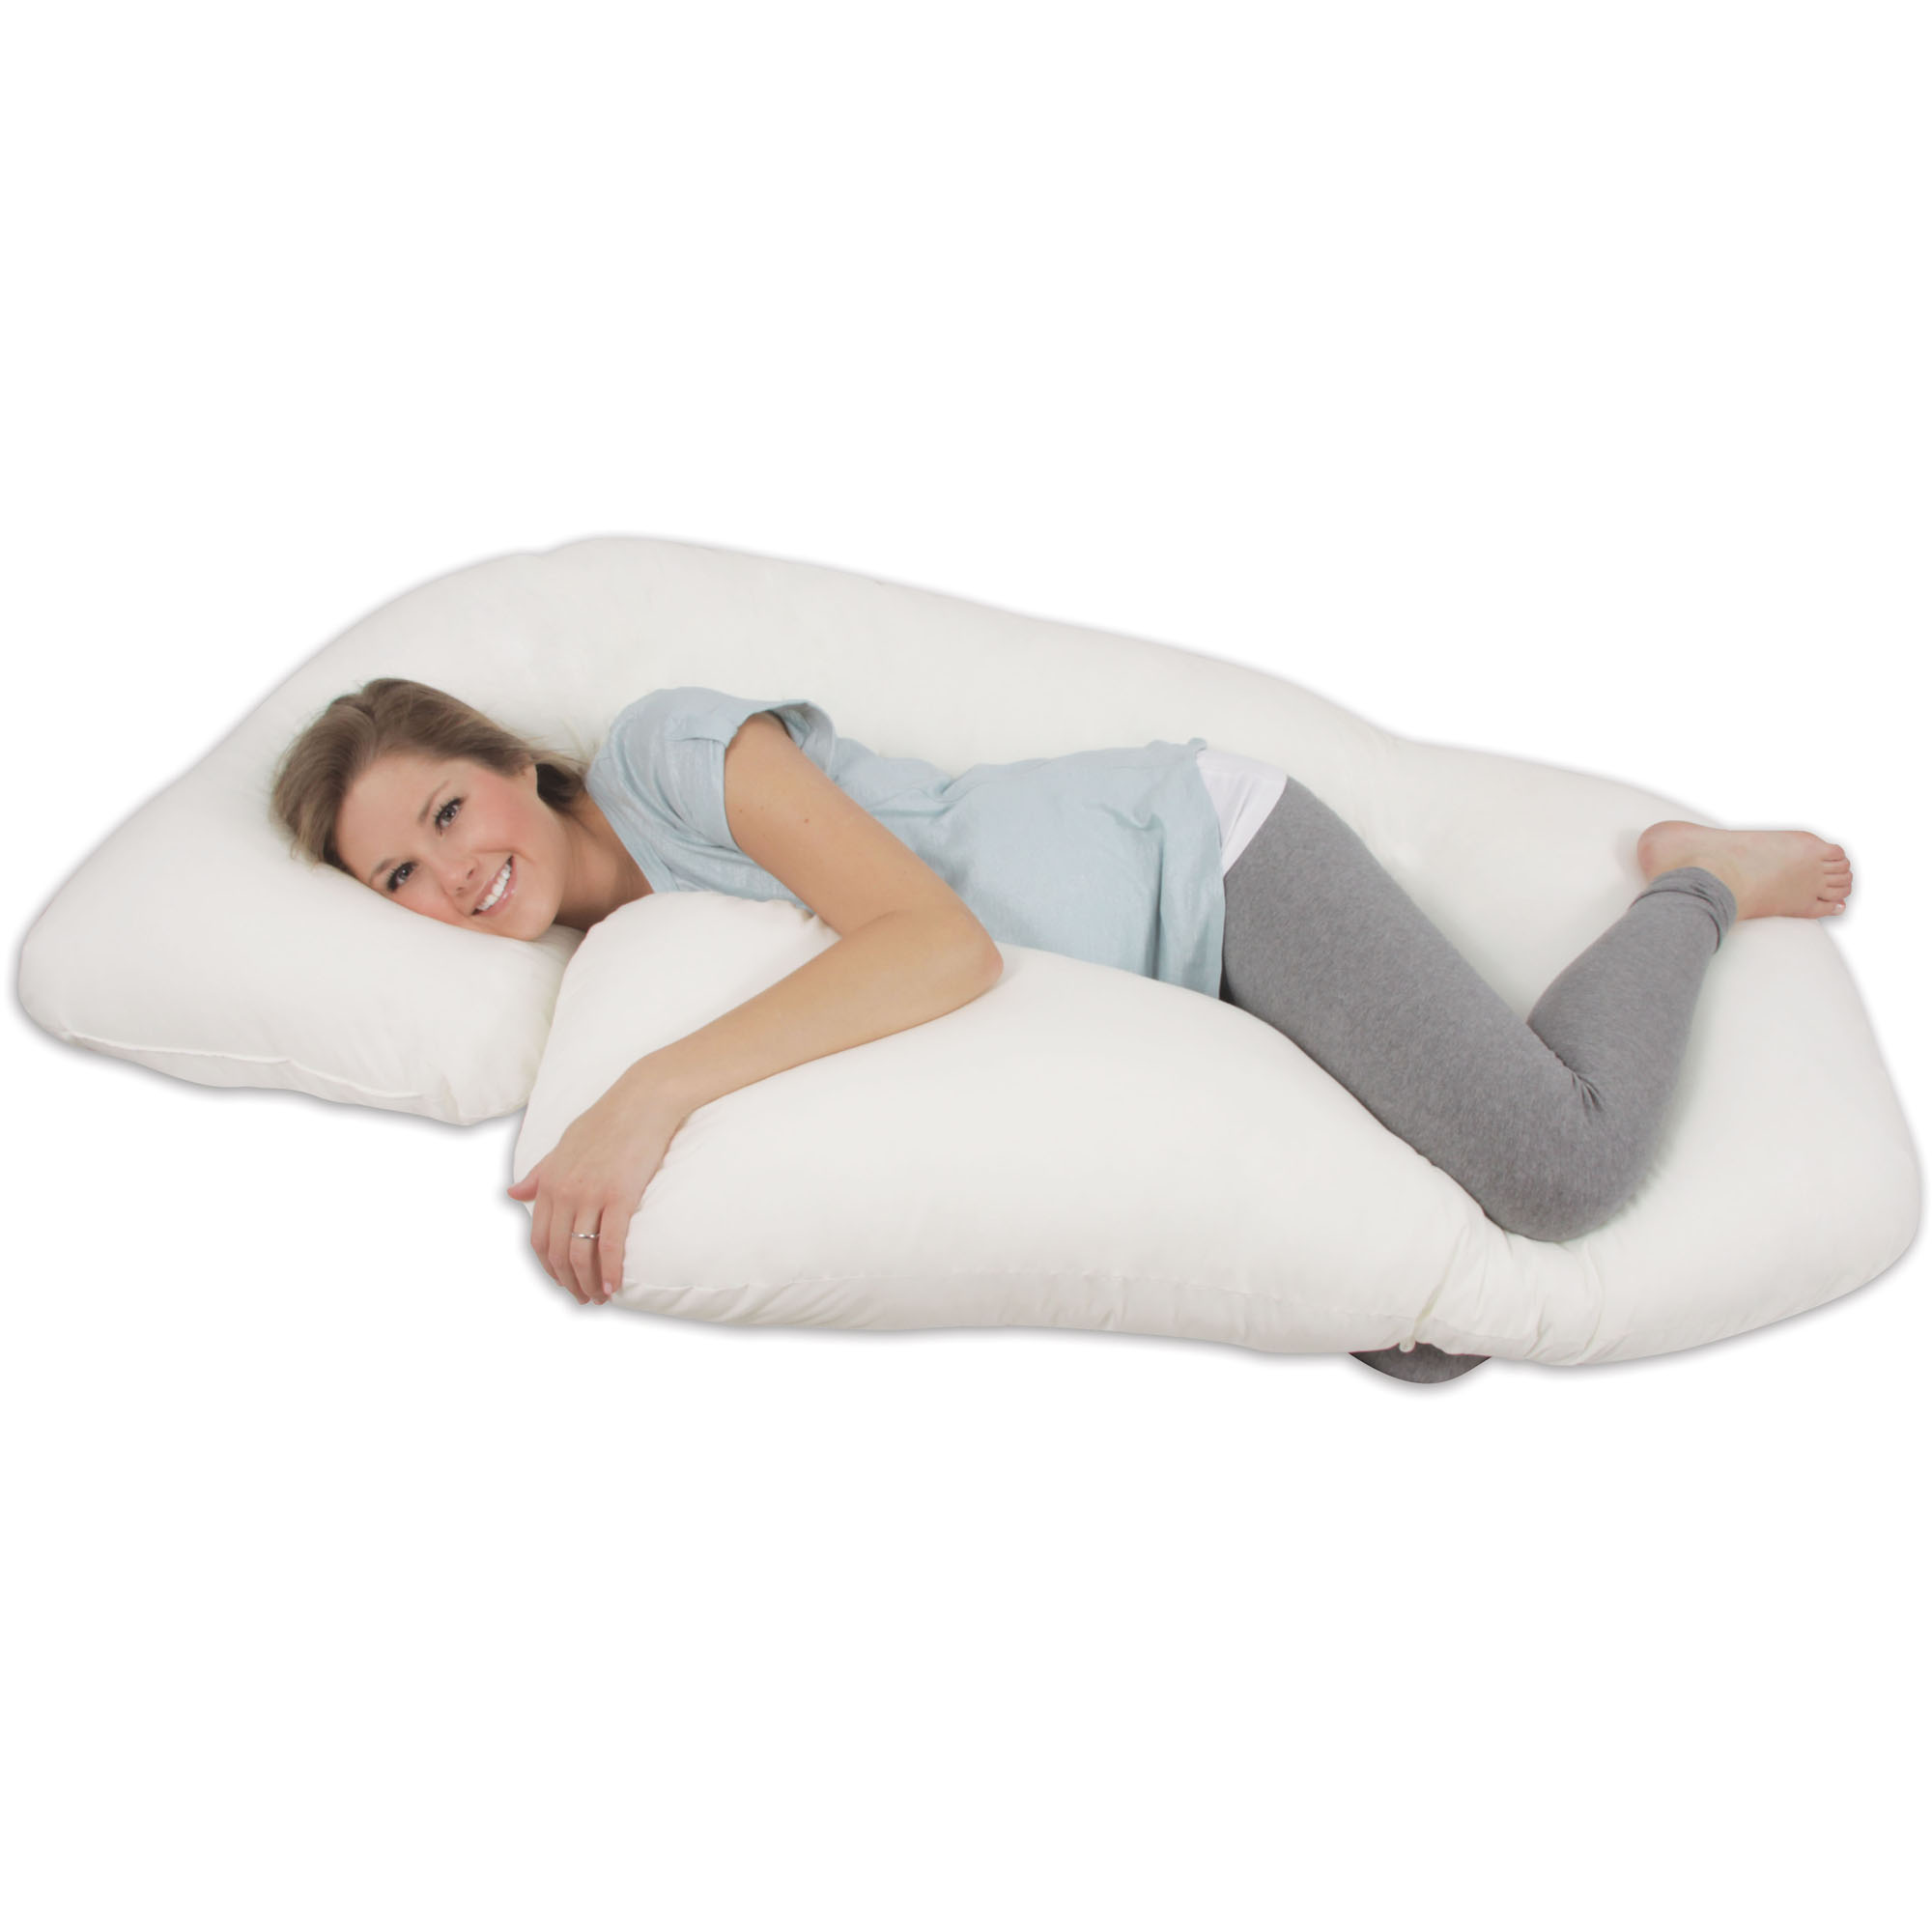 Leachco All Nighter Total Body Pregnancy Pillow, Ivory - image 3 of 5